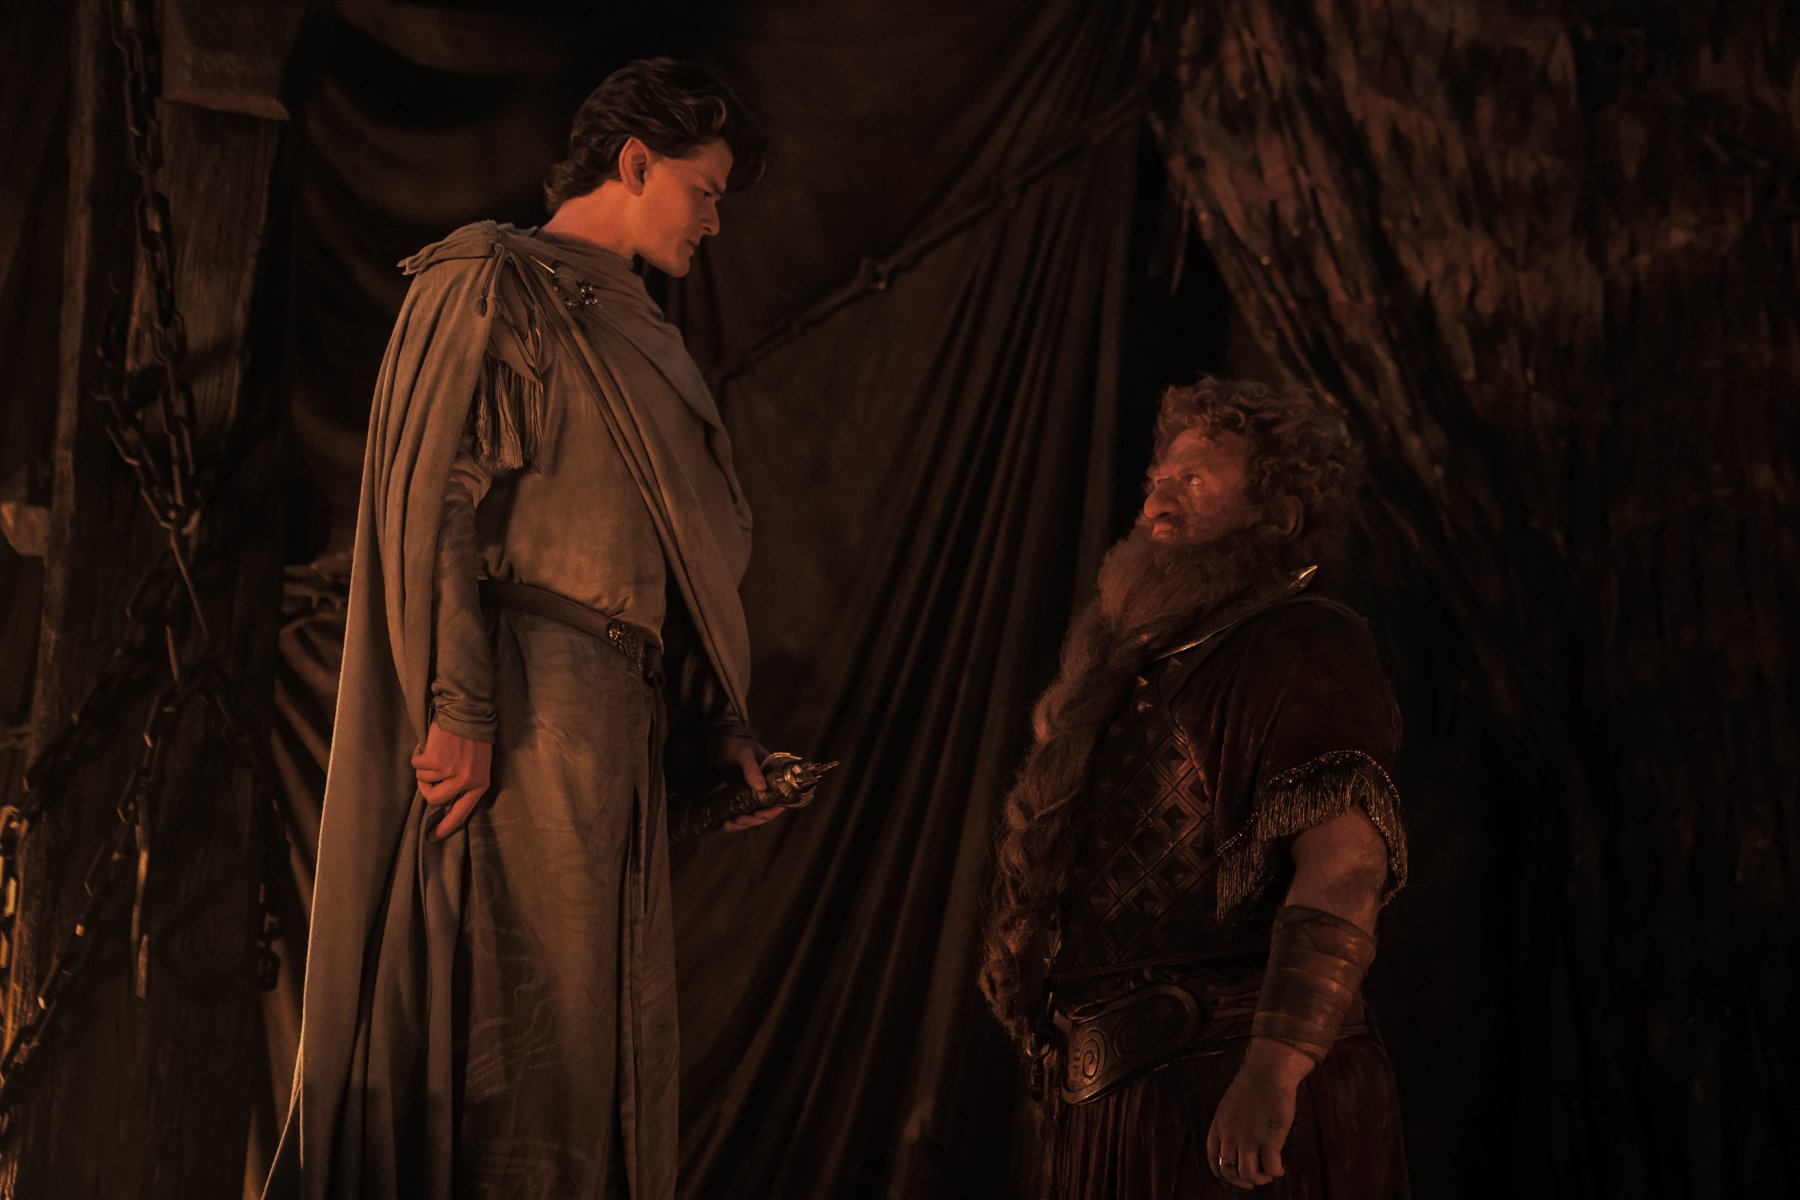 Robert Aramayo and Owain Arthur as Elrond and Durin in 'The Rings of Power' Episode 4, where they discuss Mithril. The two are in a dark mine facing one another.